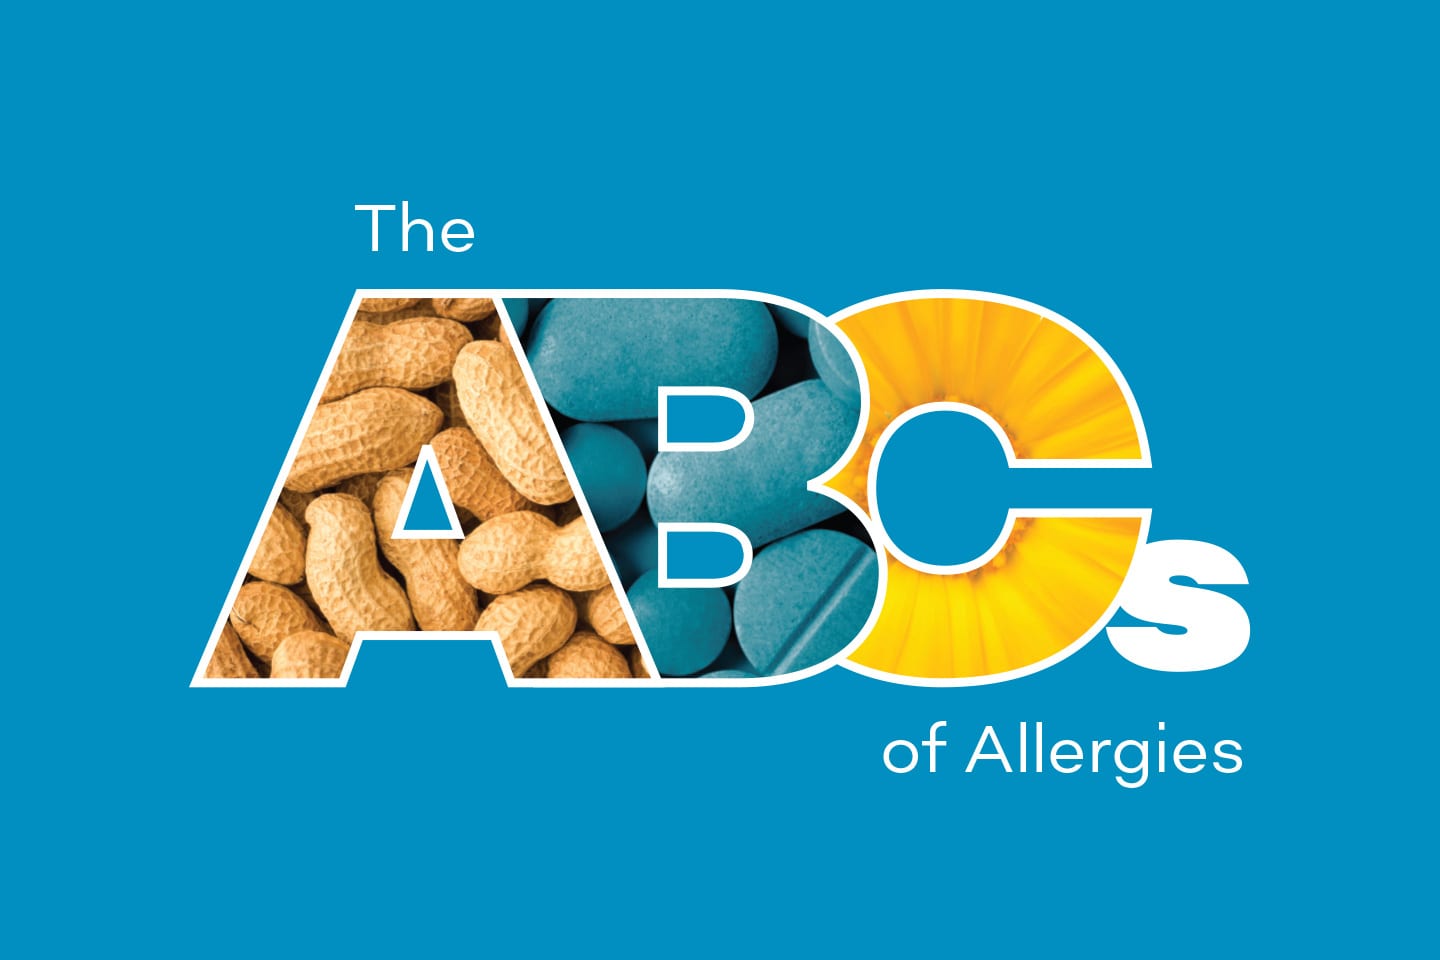 Graphic saying 'The ABCs of Allergies'